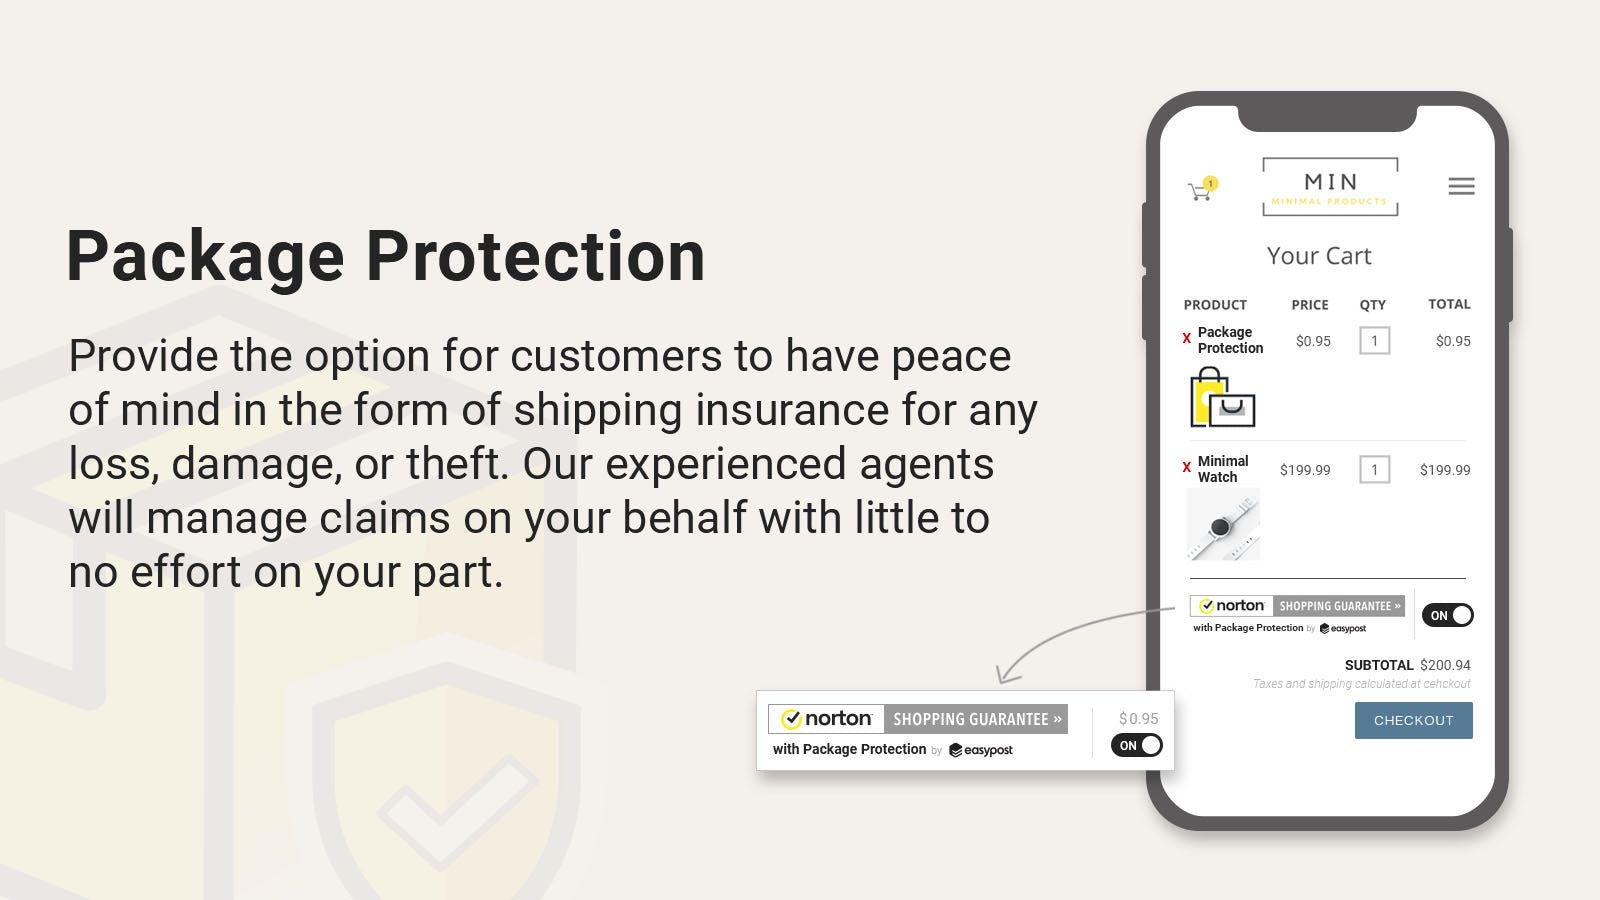 Package Protection by EasyPost